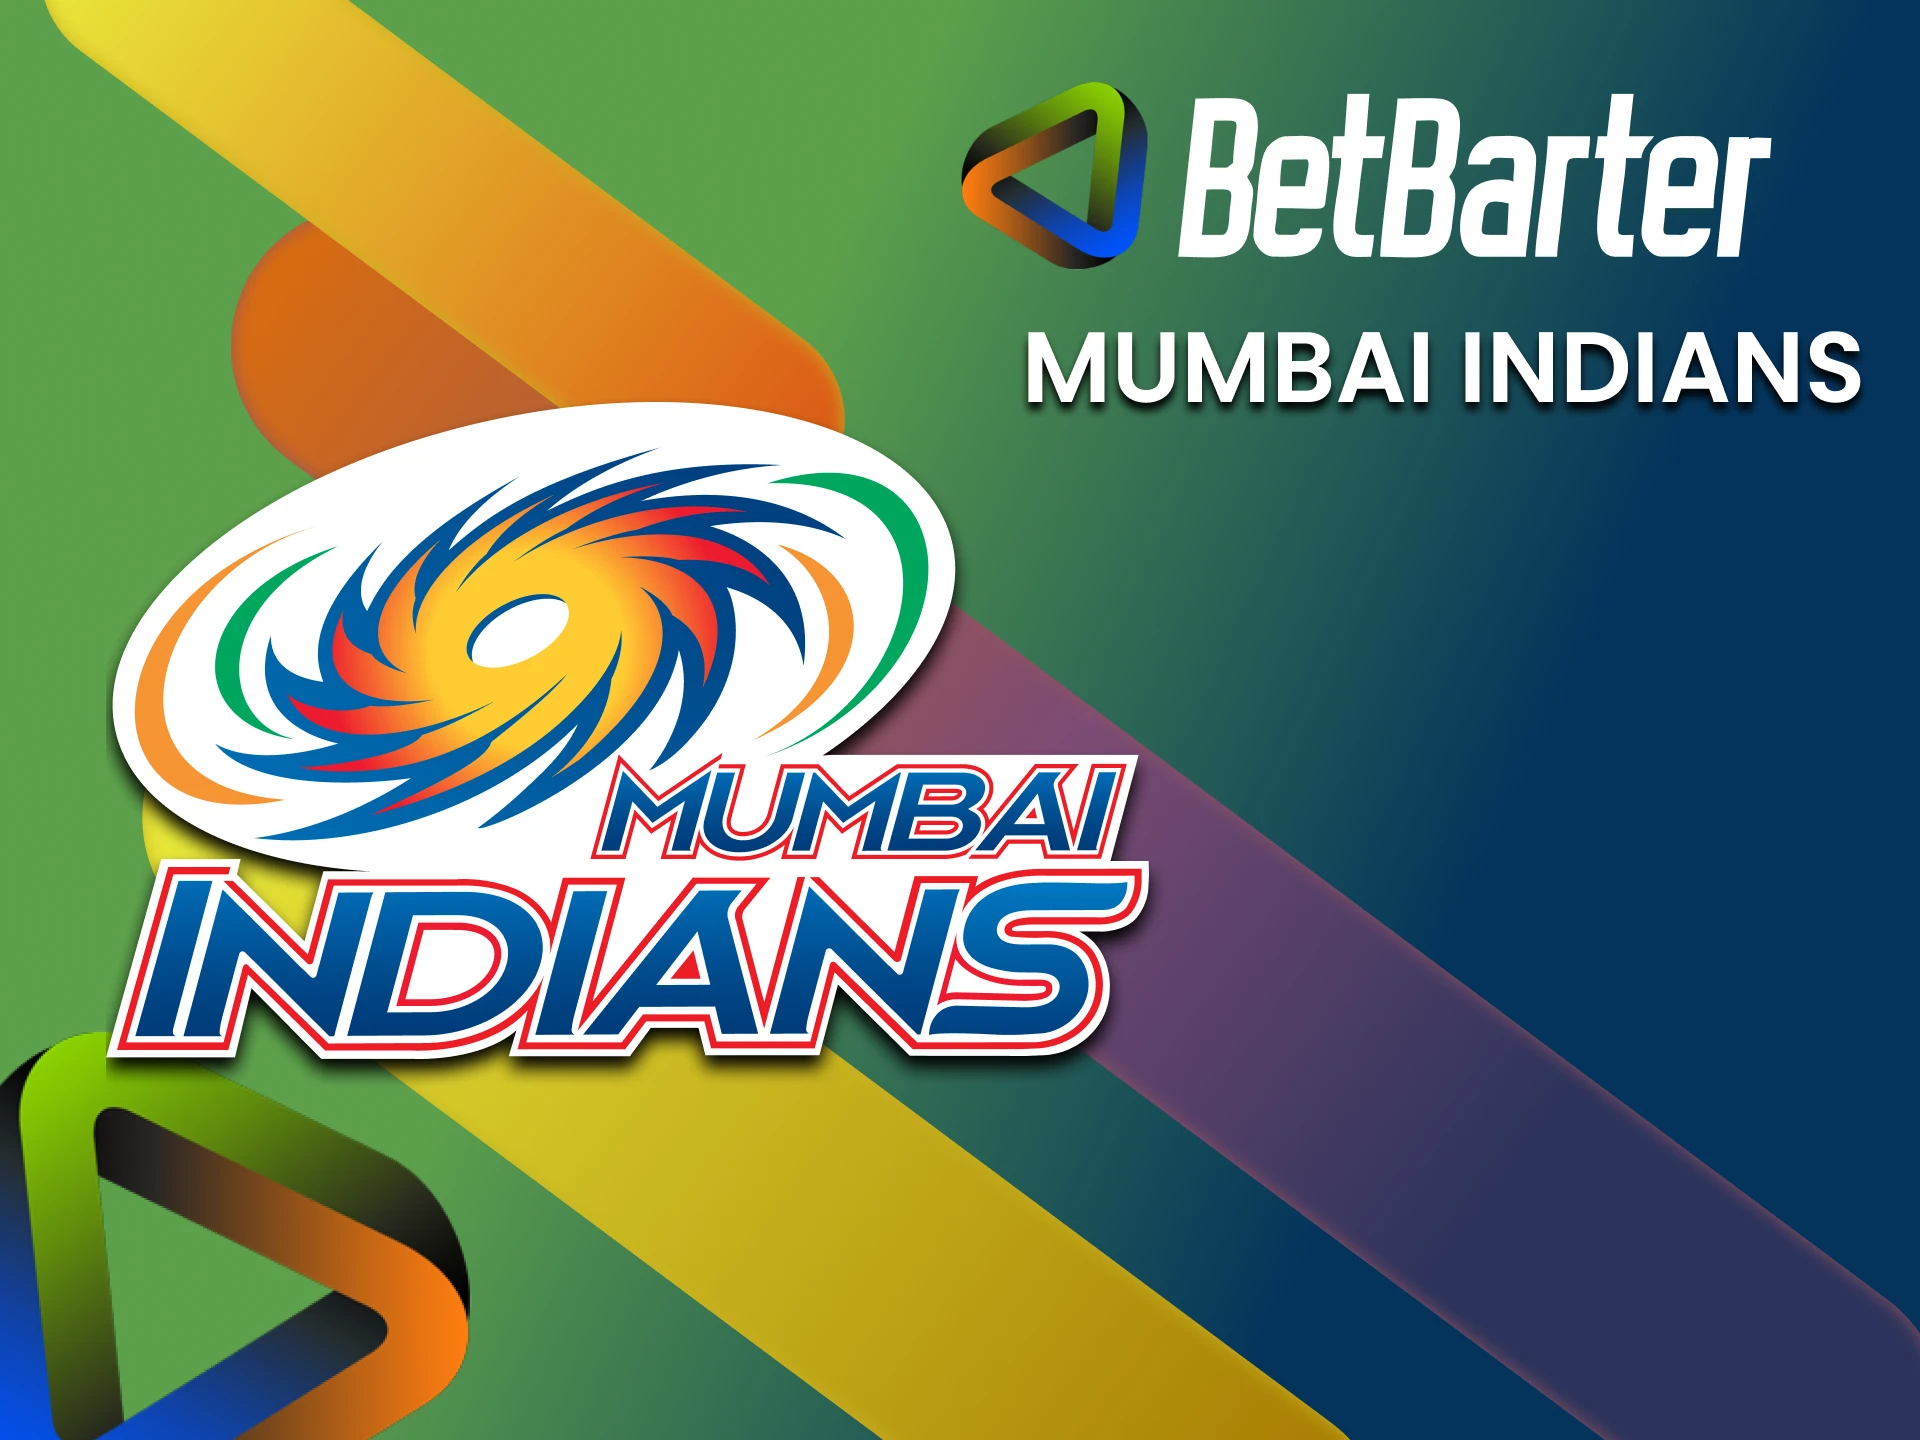 To bet on the IPL from BetBarter, choose the Mumbai Indians team.